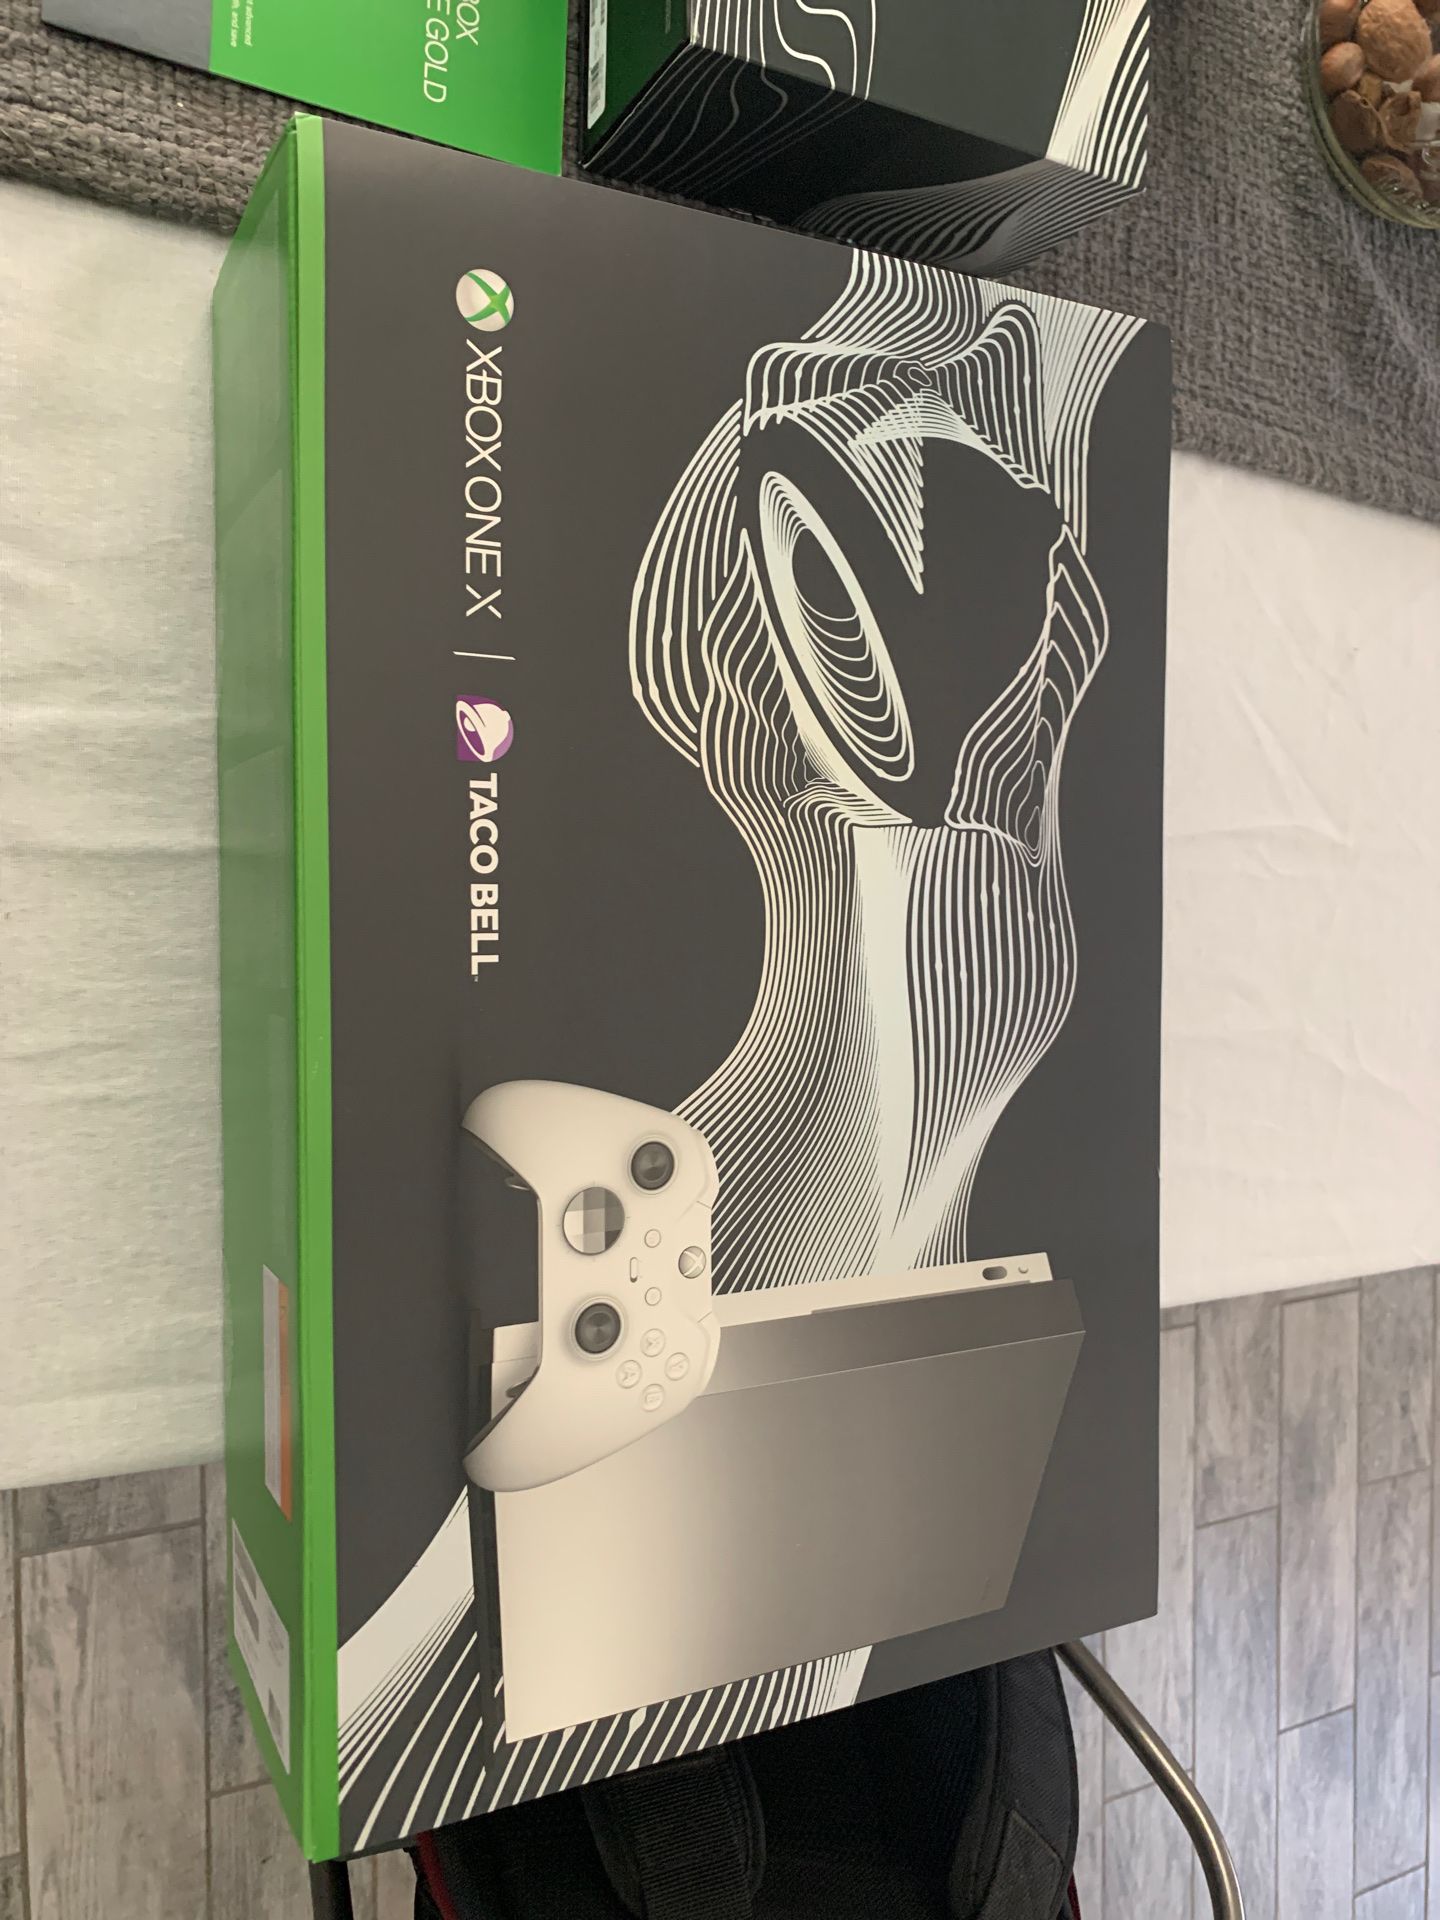 Xbox One X Taco Bell Edition